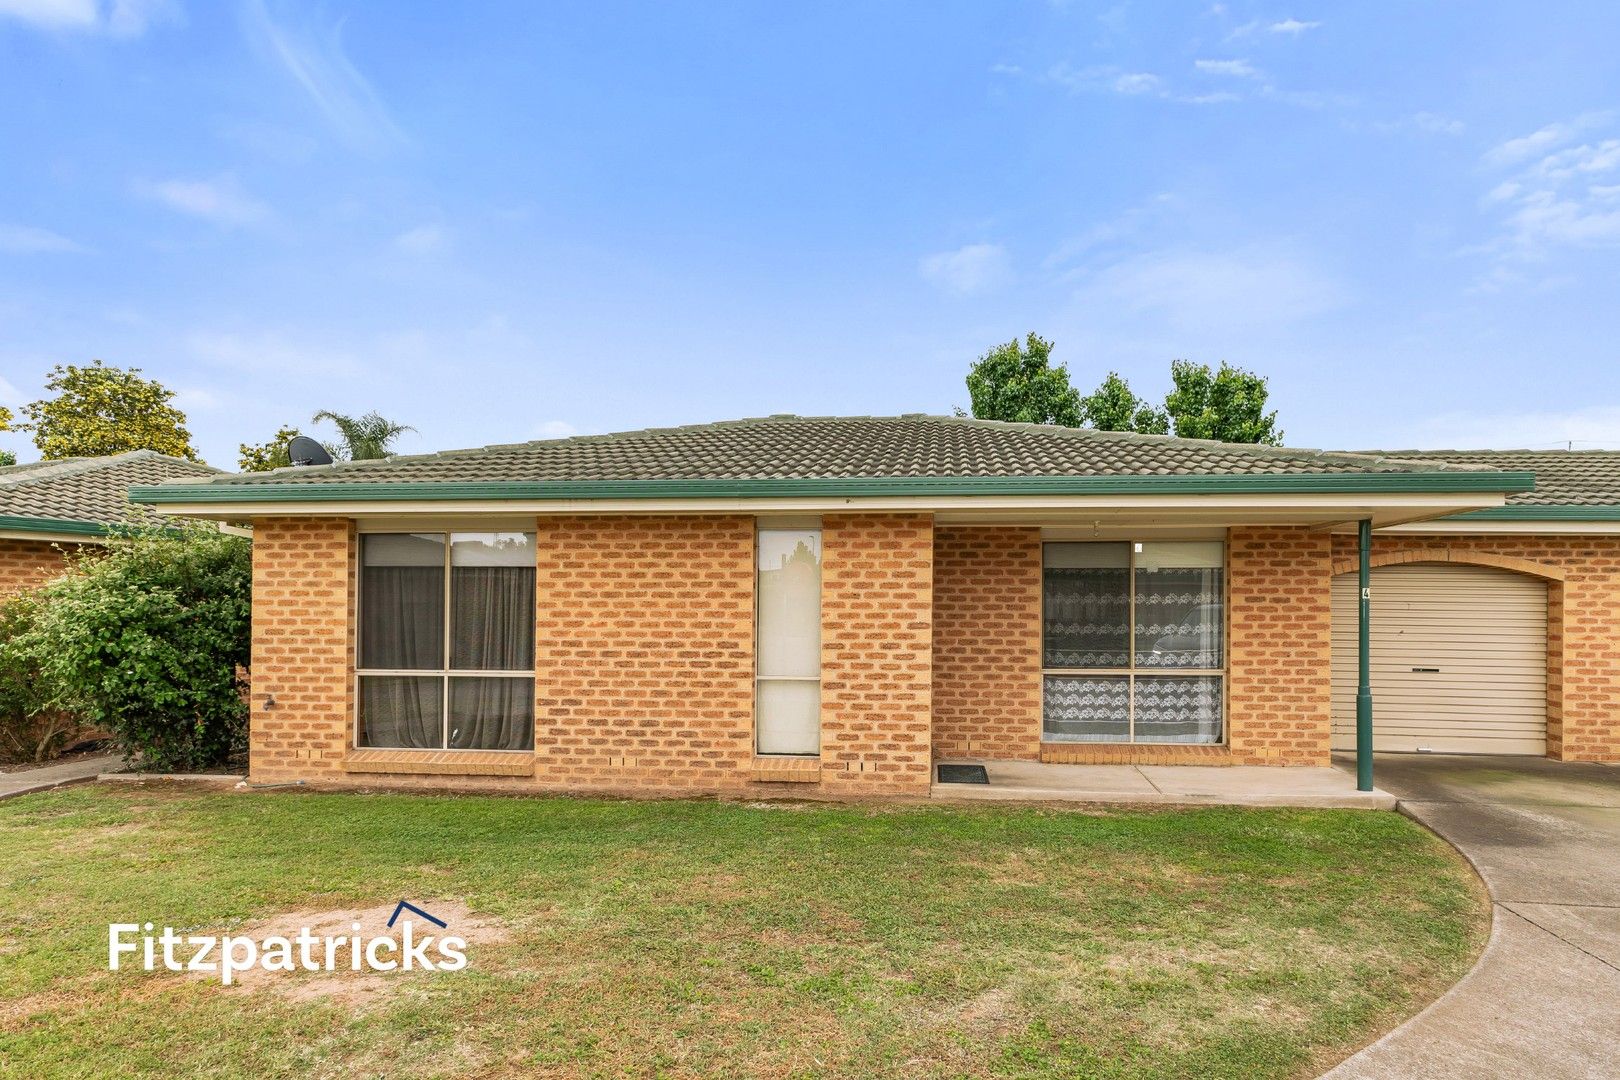 2 bedrooms Apartment / Unit / Flat in 4/160 Forsyth Street WAGGA WAGGA NSW, 2650